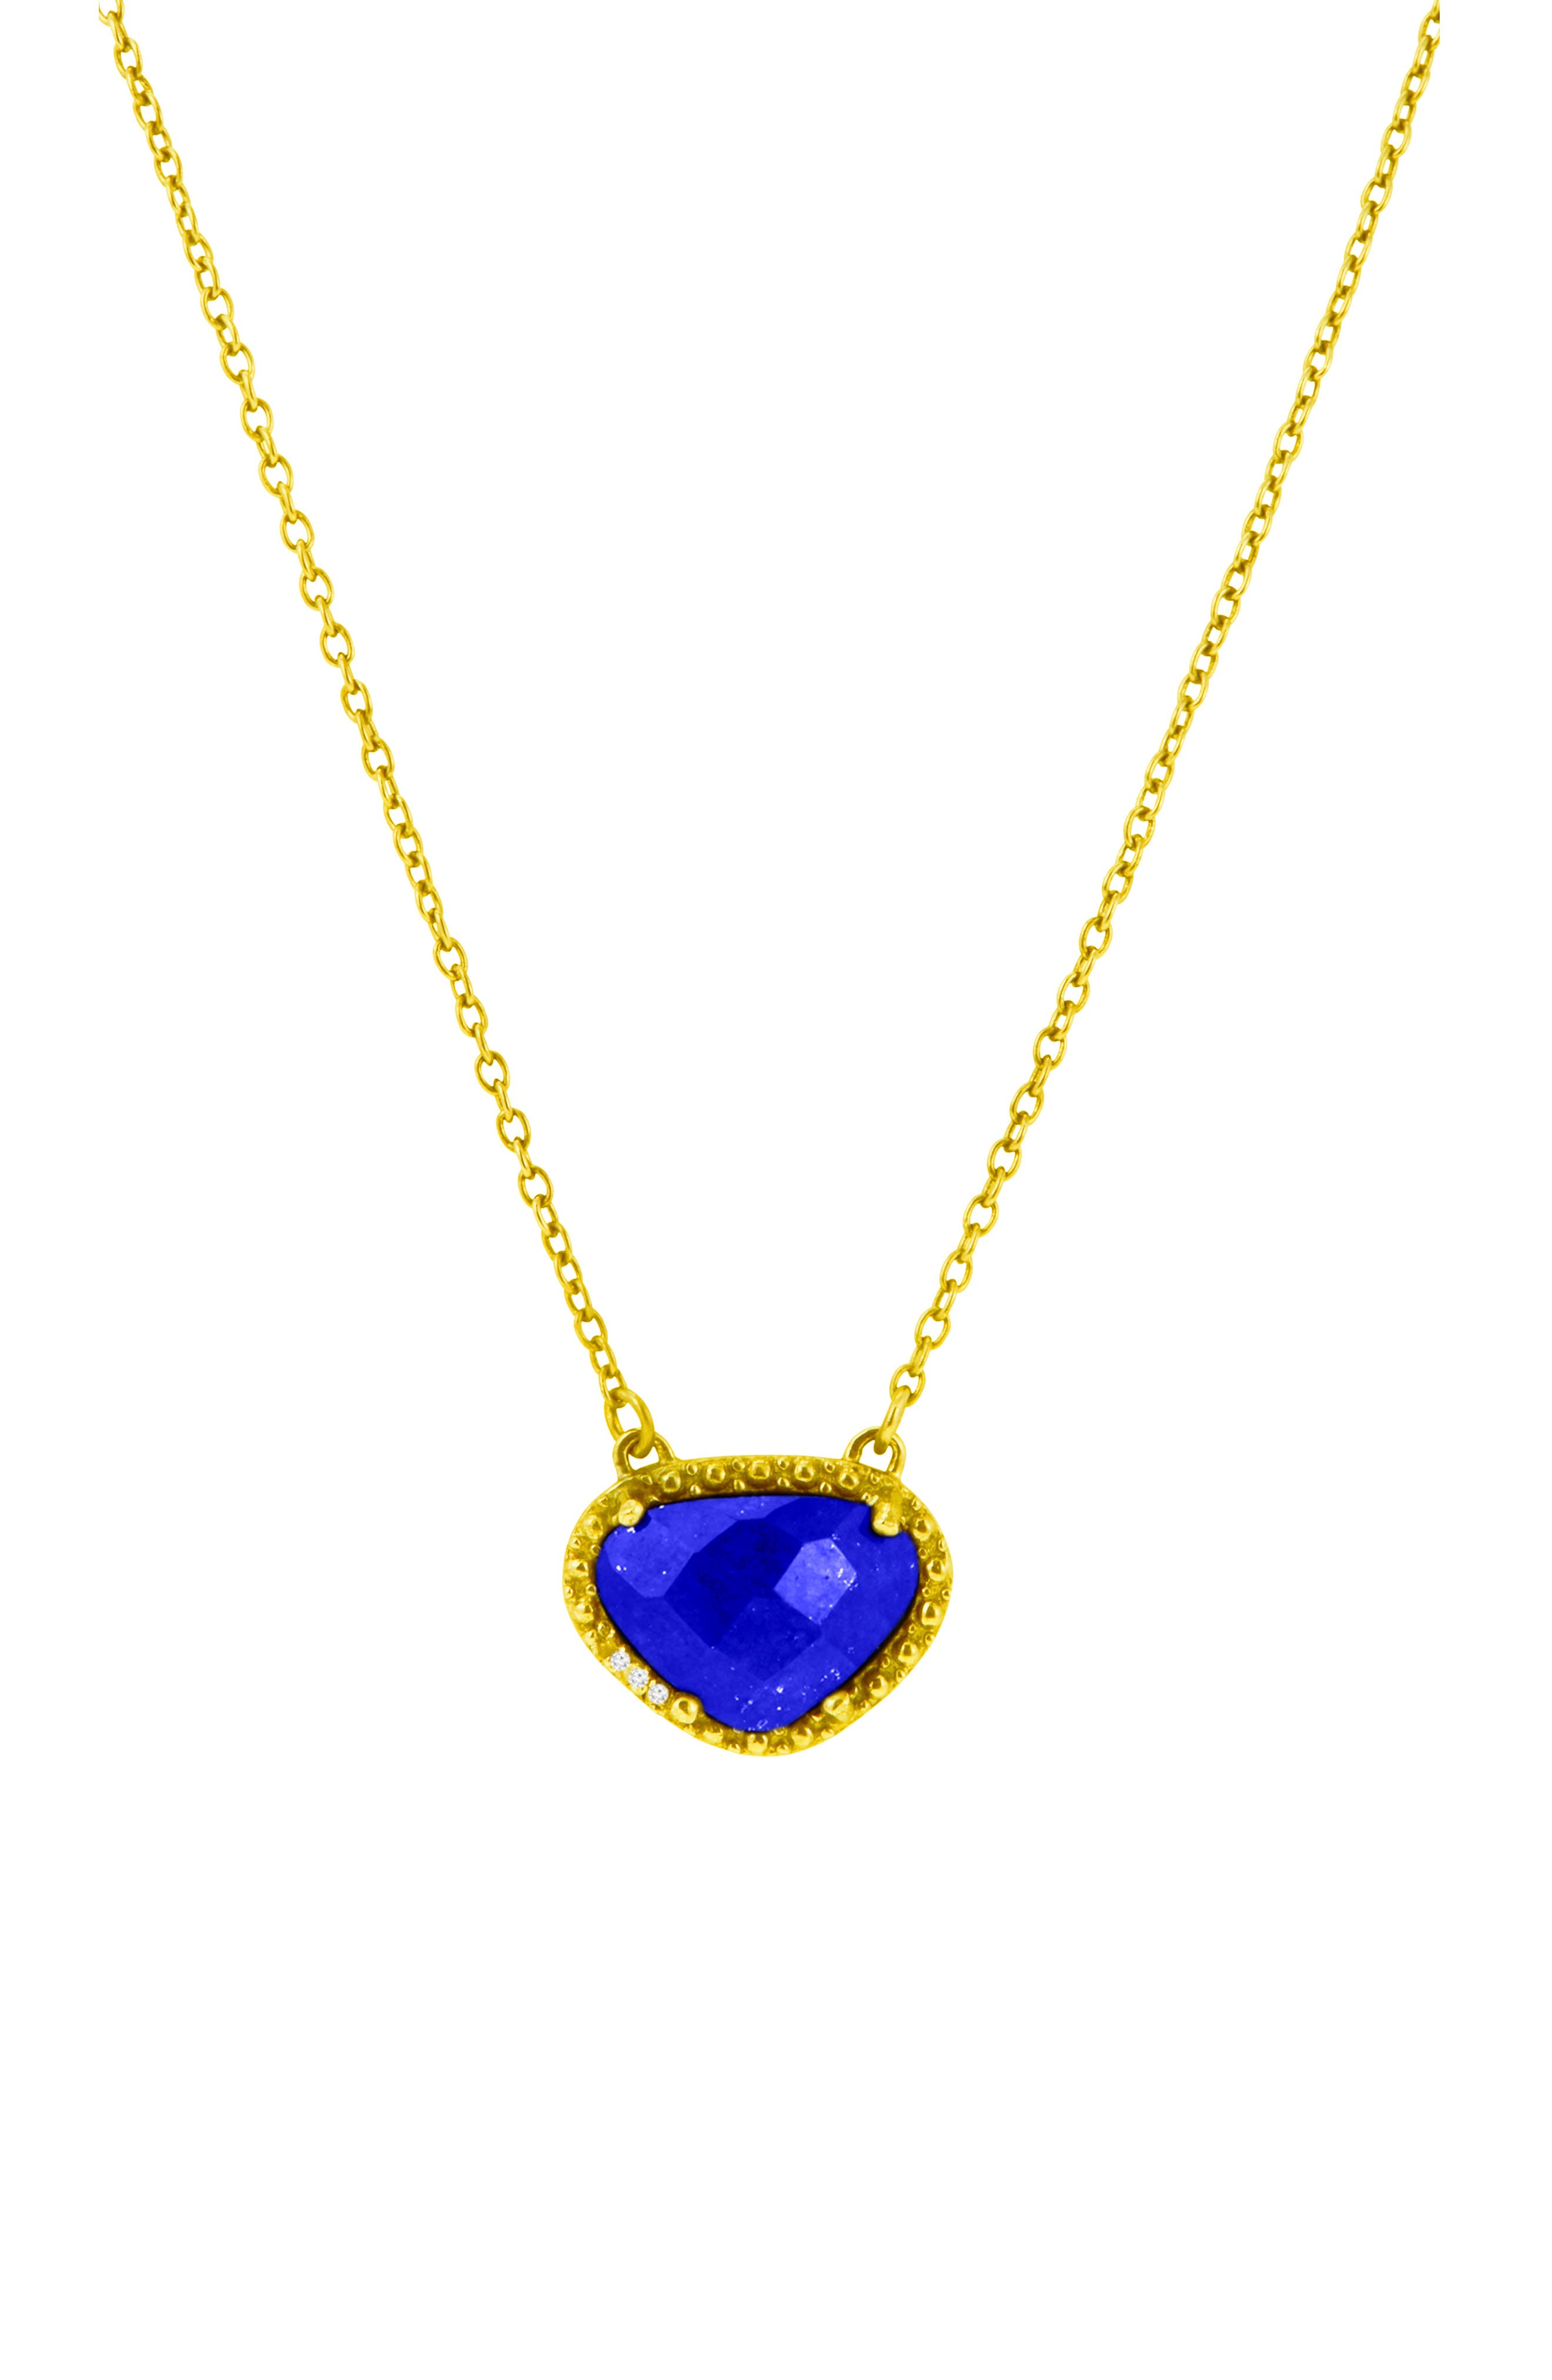 Adornia 14k Gold Plated Sterling Silver Rose Cut Lapis Lazuli Pendant Necklace In Metallic Gold